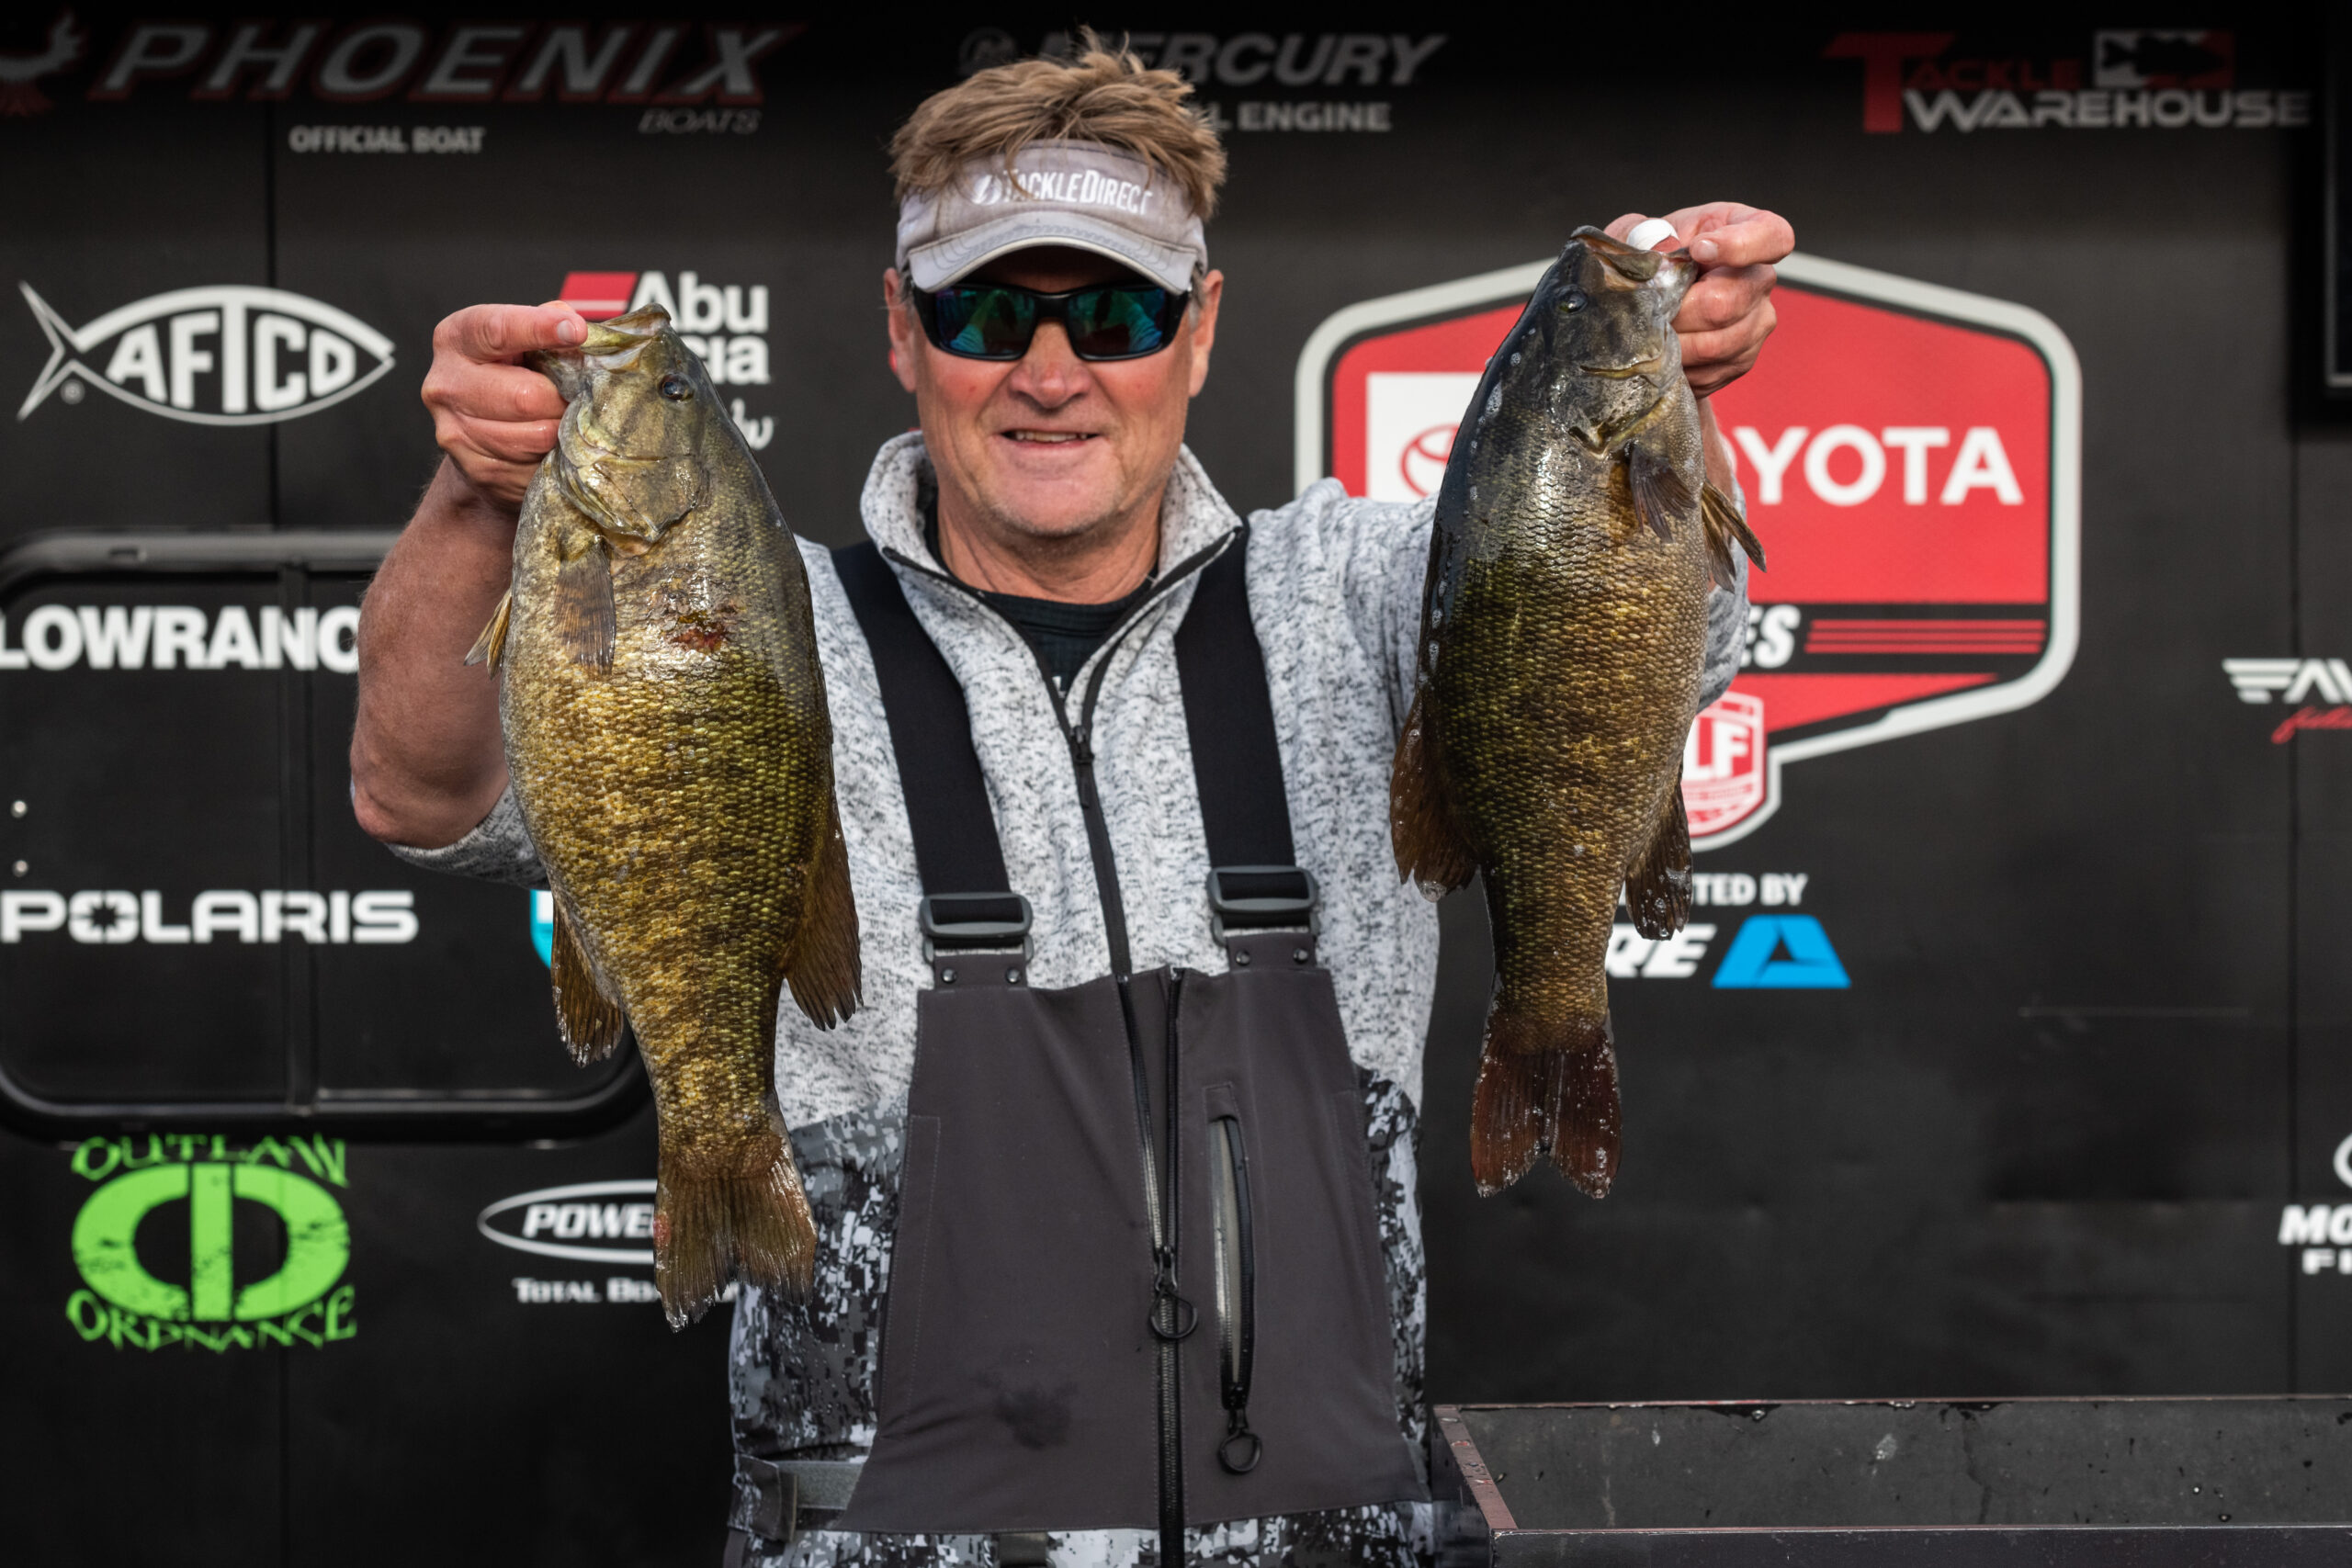 Top 5 Patterns - Day 1 on the St. Lawrence River - Major League Fishing